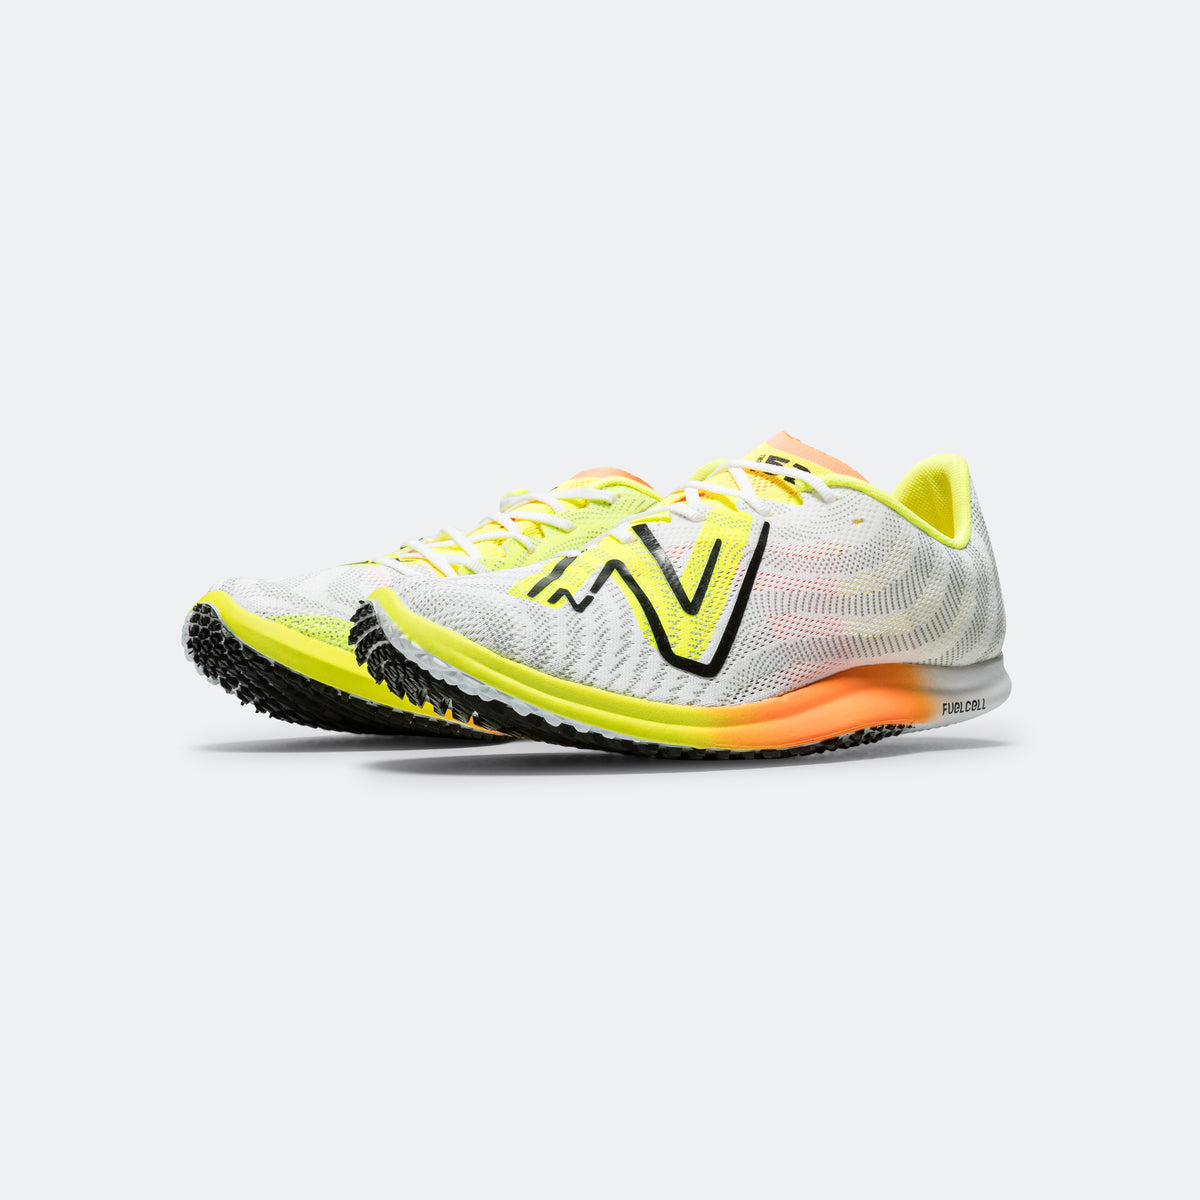 New Balance Mens FuelCell 5280 v2 - White/Lime | Up There Athletics